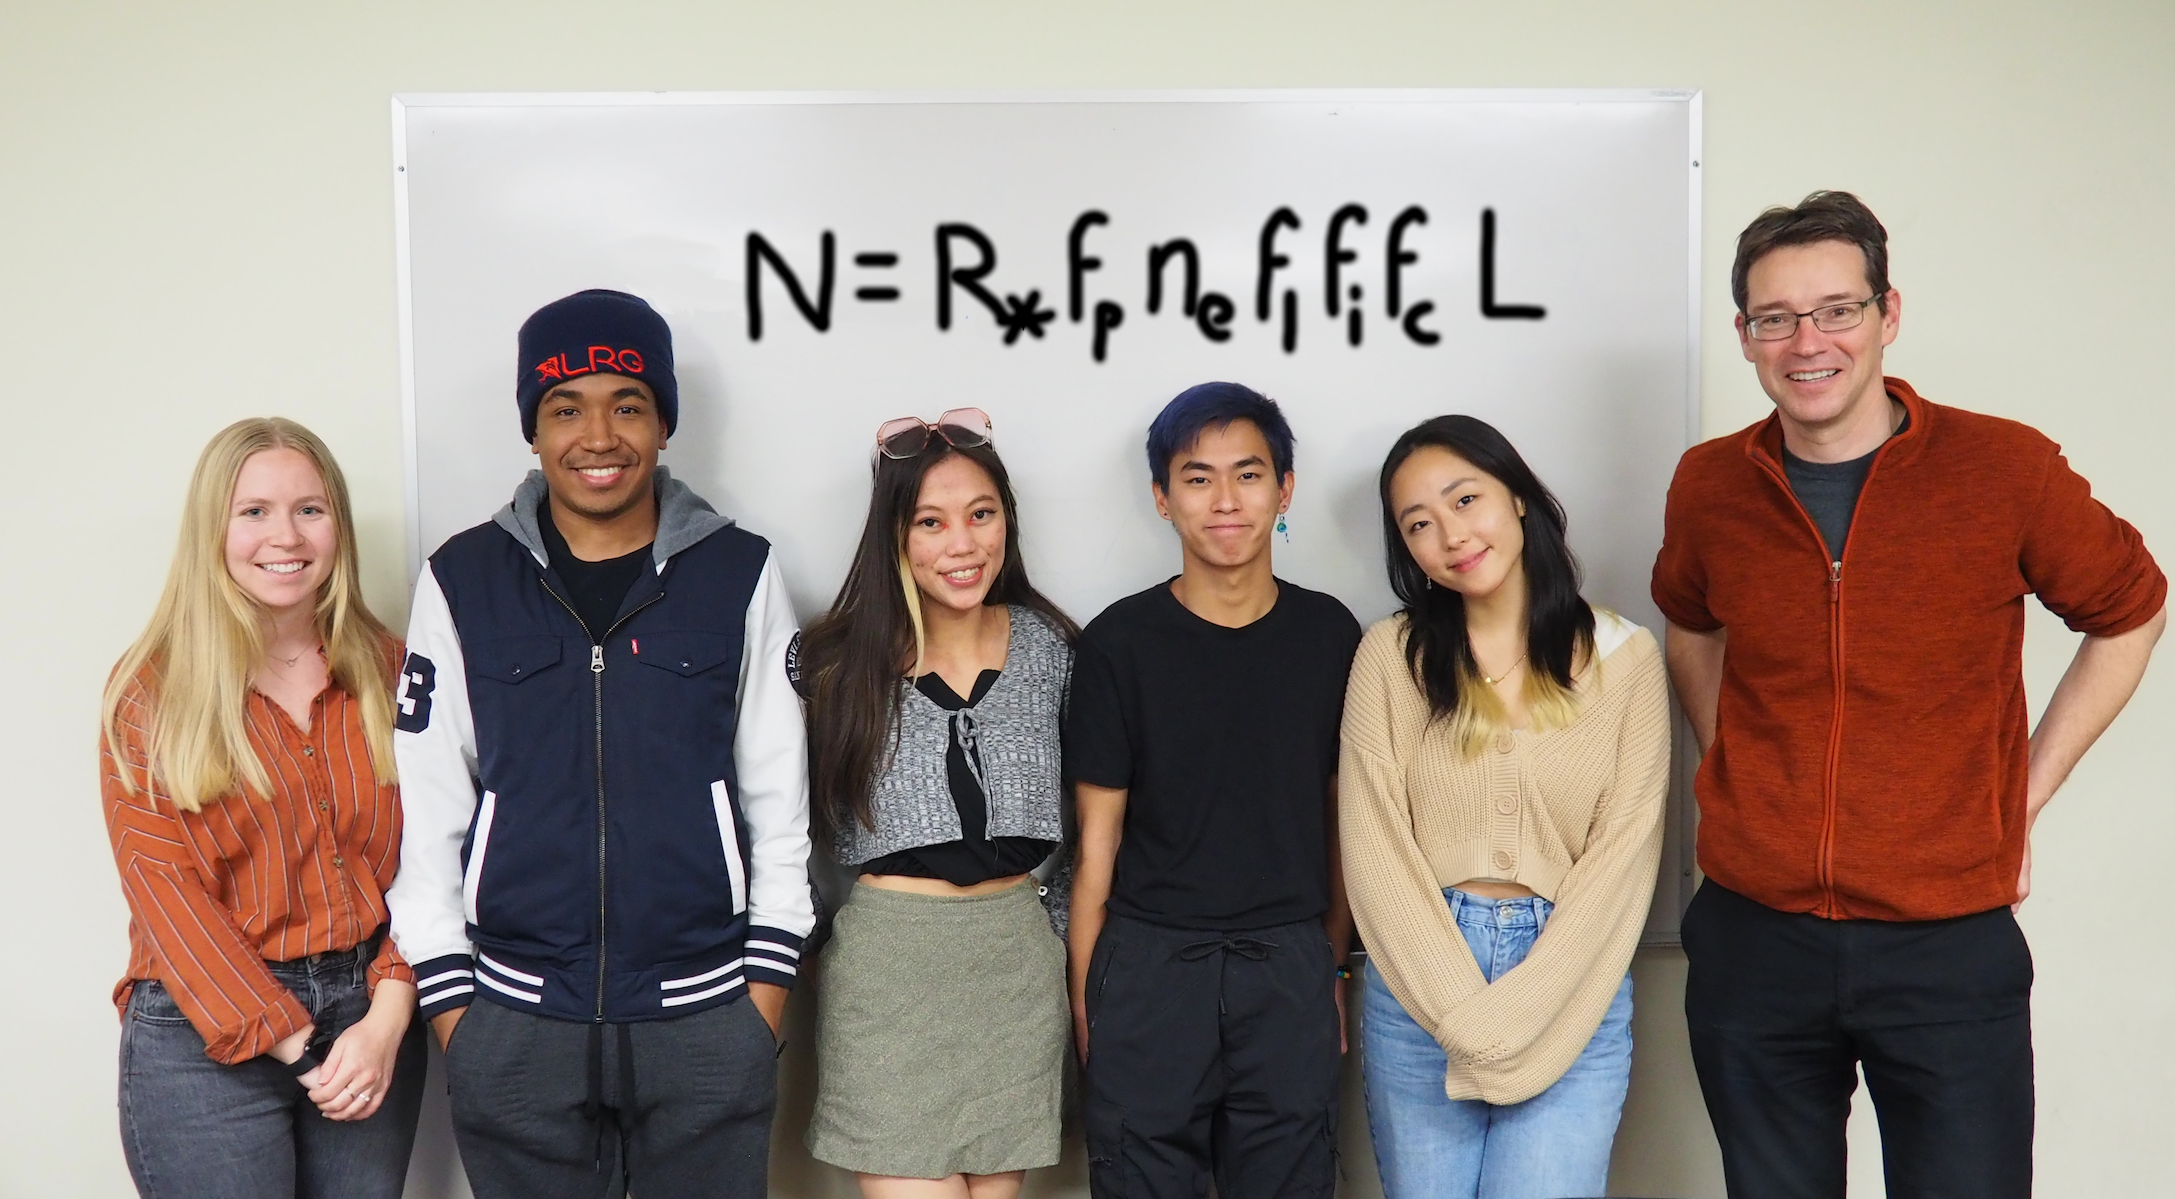 A group of 6 men and women are standing and smiling in front of a white board with the equation N-R*fpnef1fifcL written in large black print.